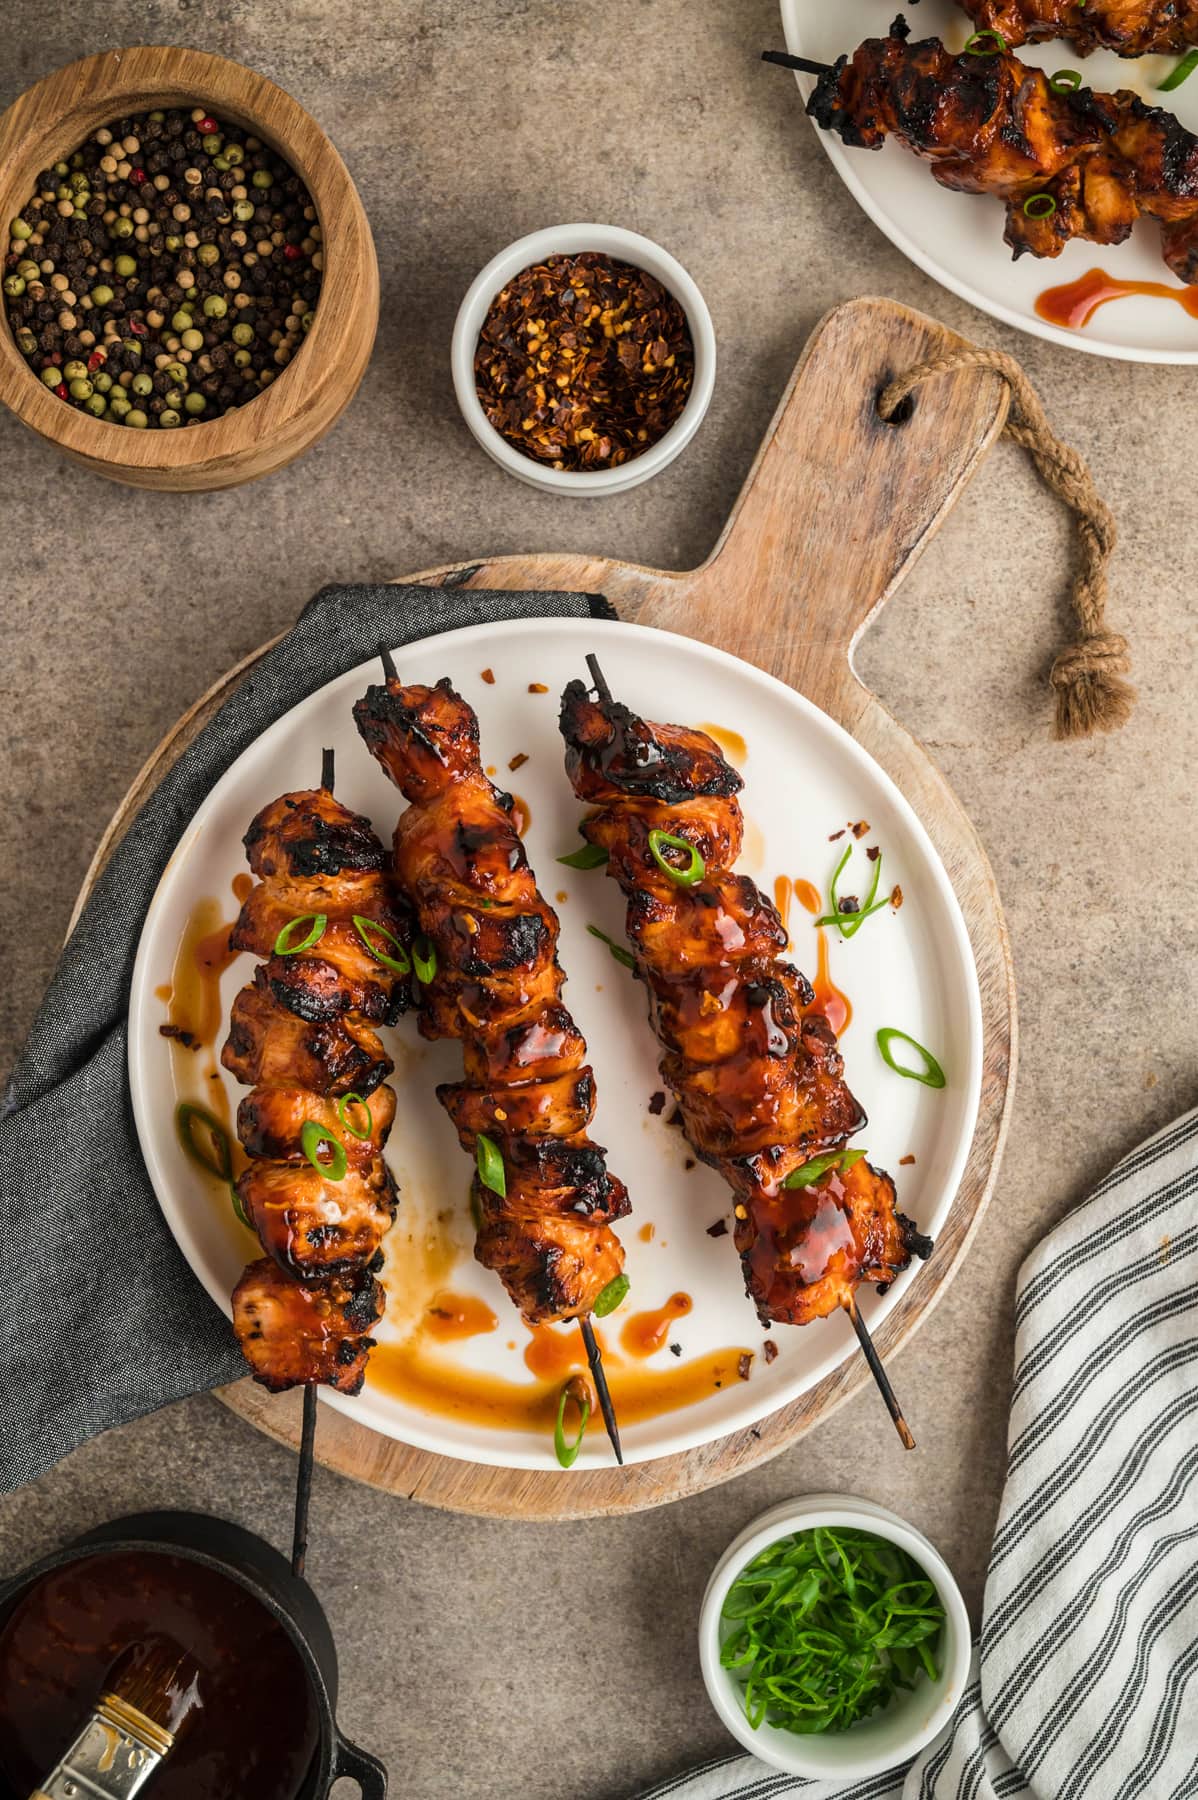 Three chicken skewers on a white plate